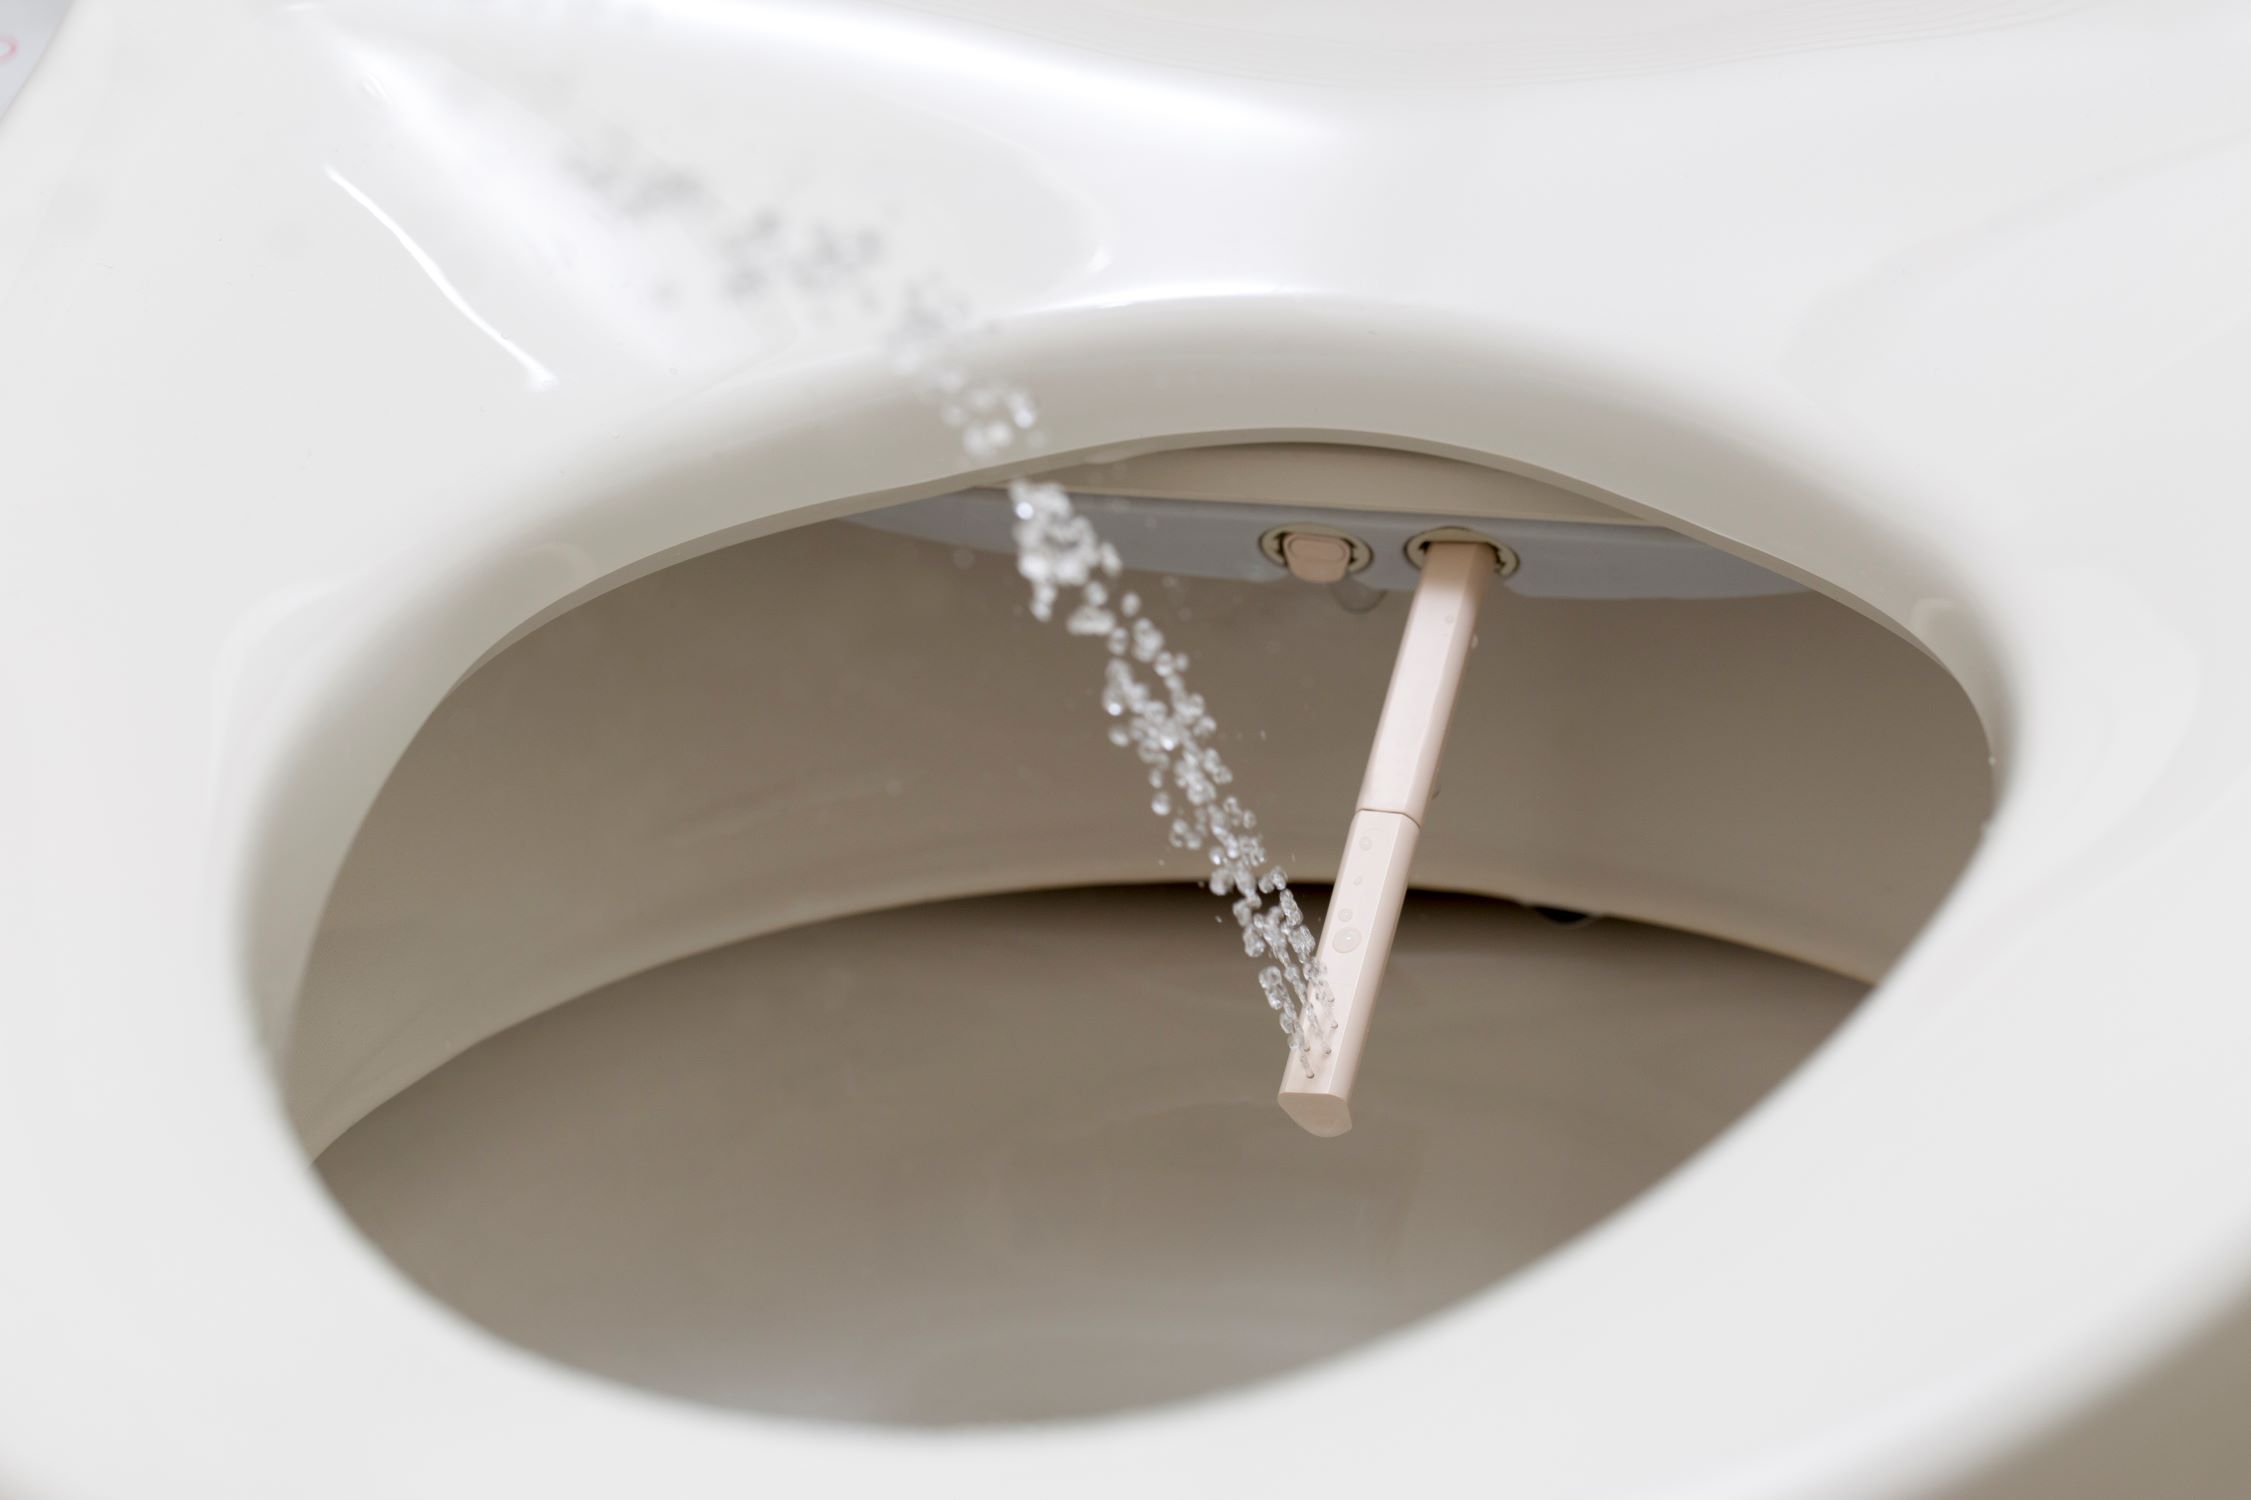 How Does A Bidet Toilet Work